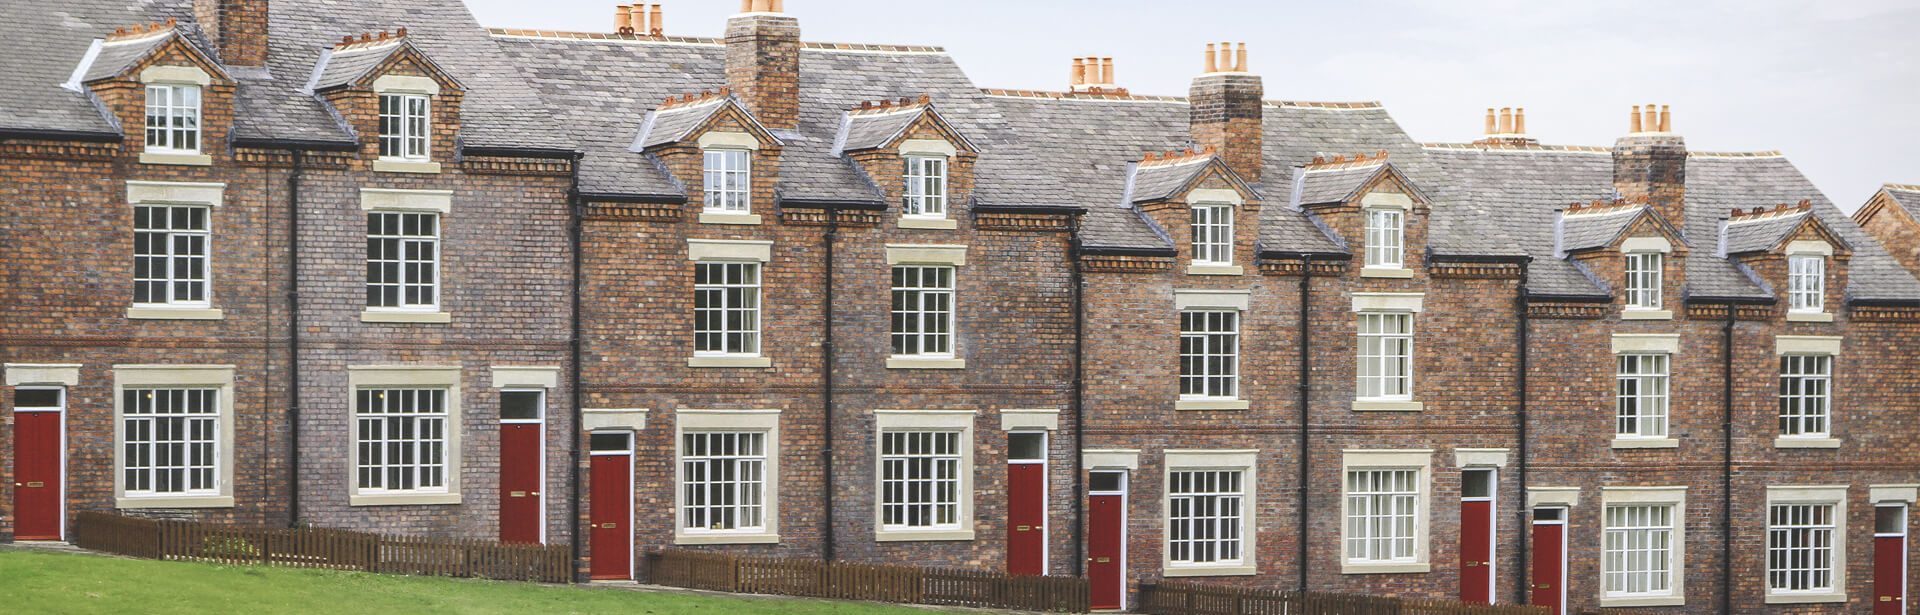 Why TRC was chosen to supply 1,600 windows for 194 Grade II listed cottages